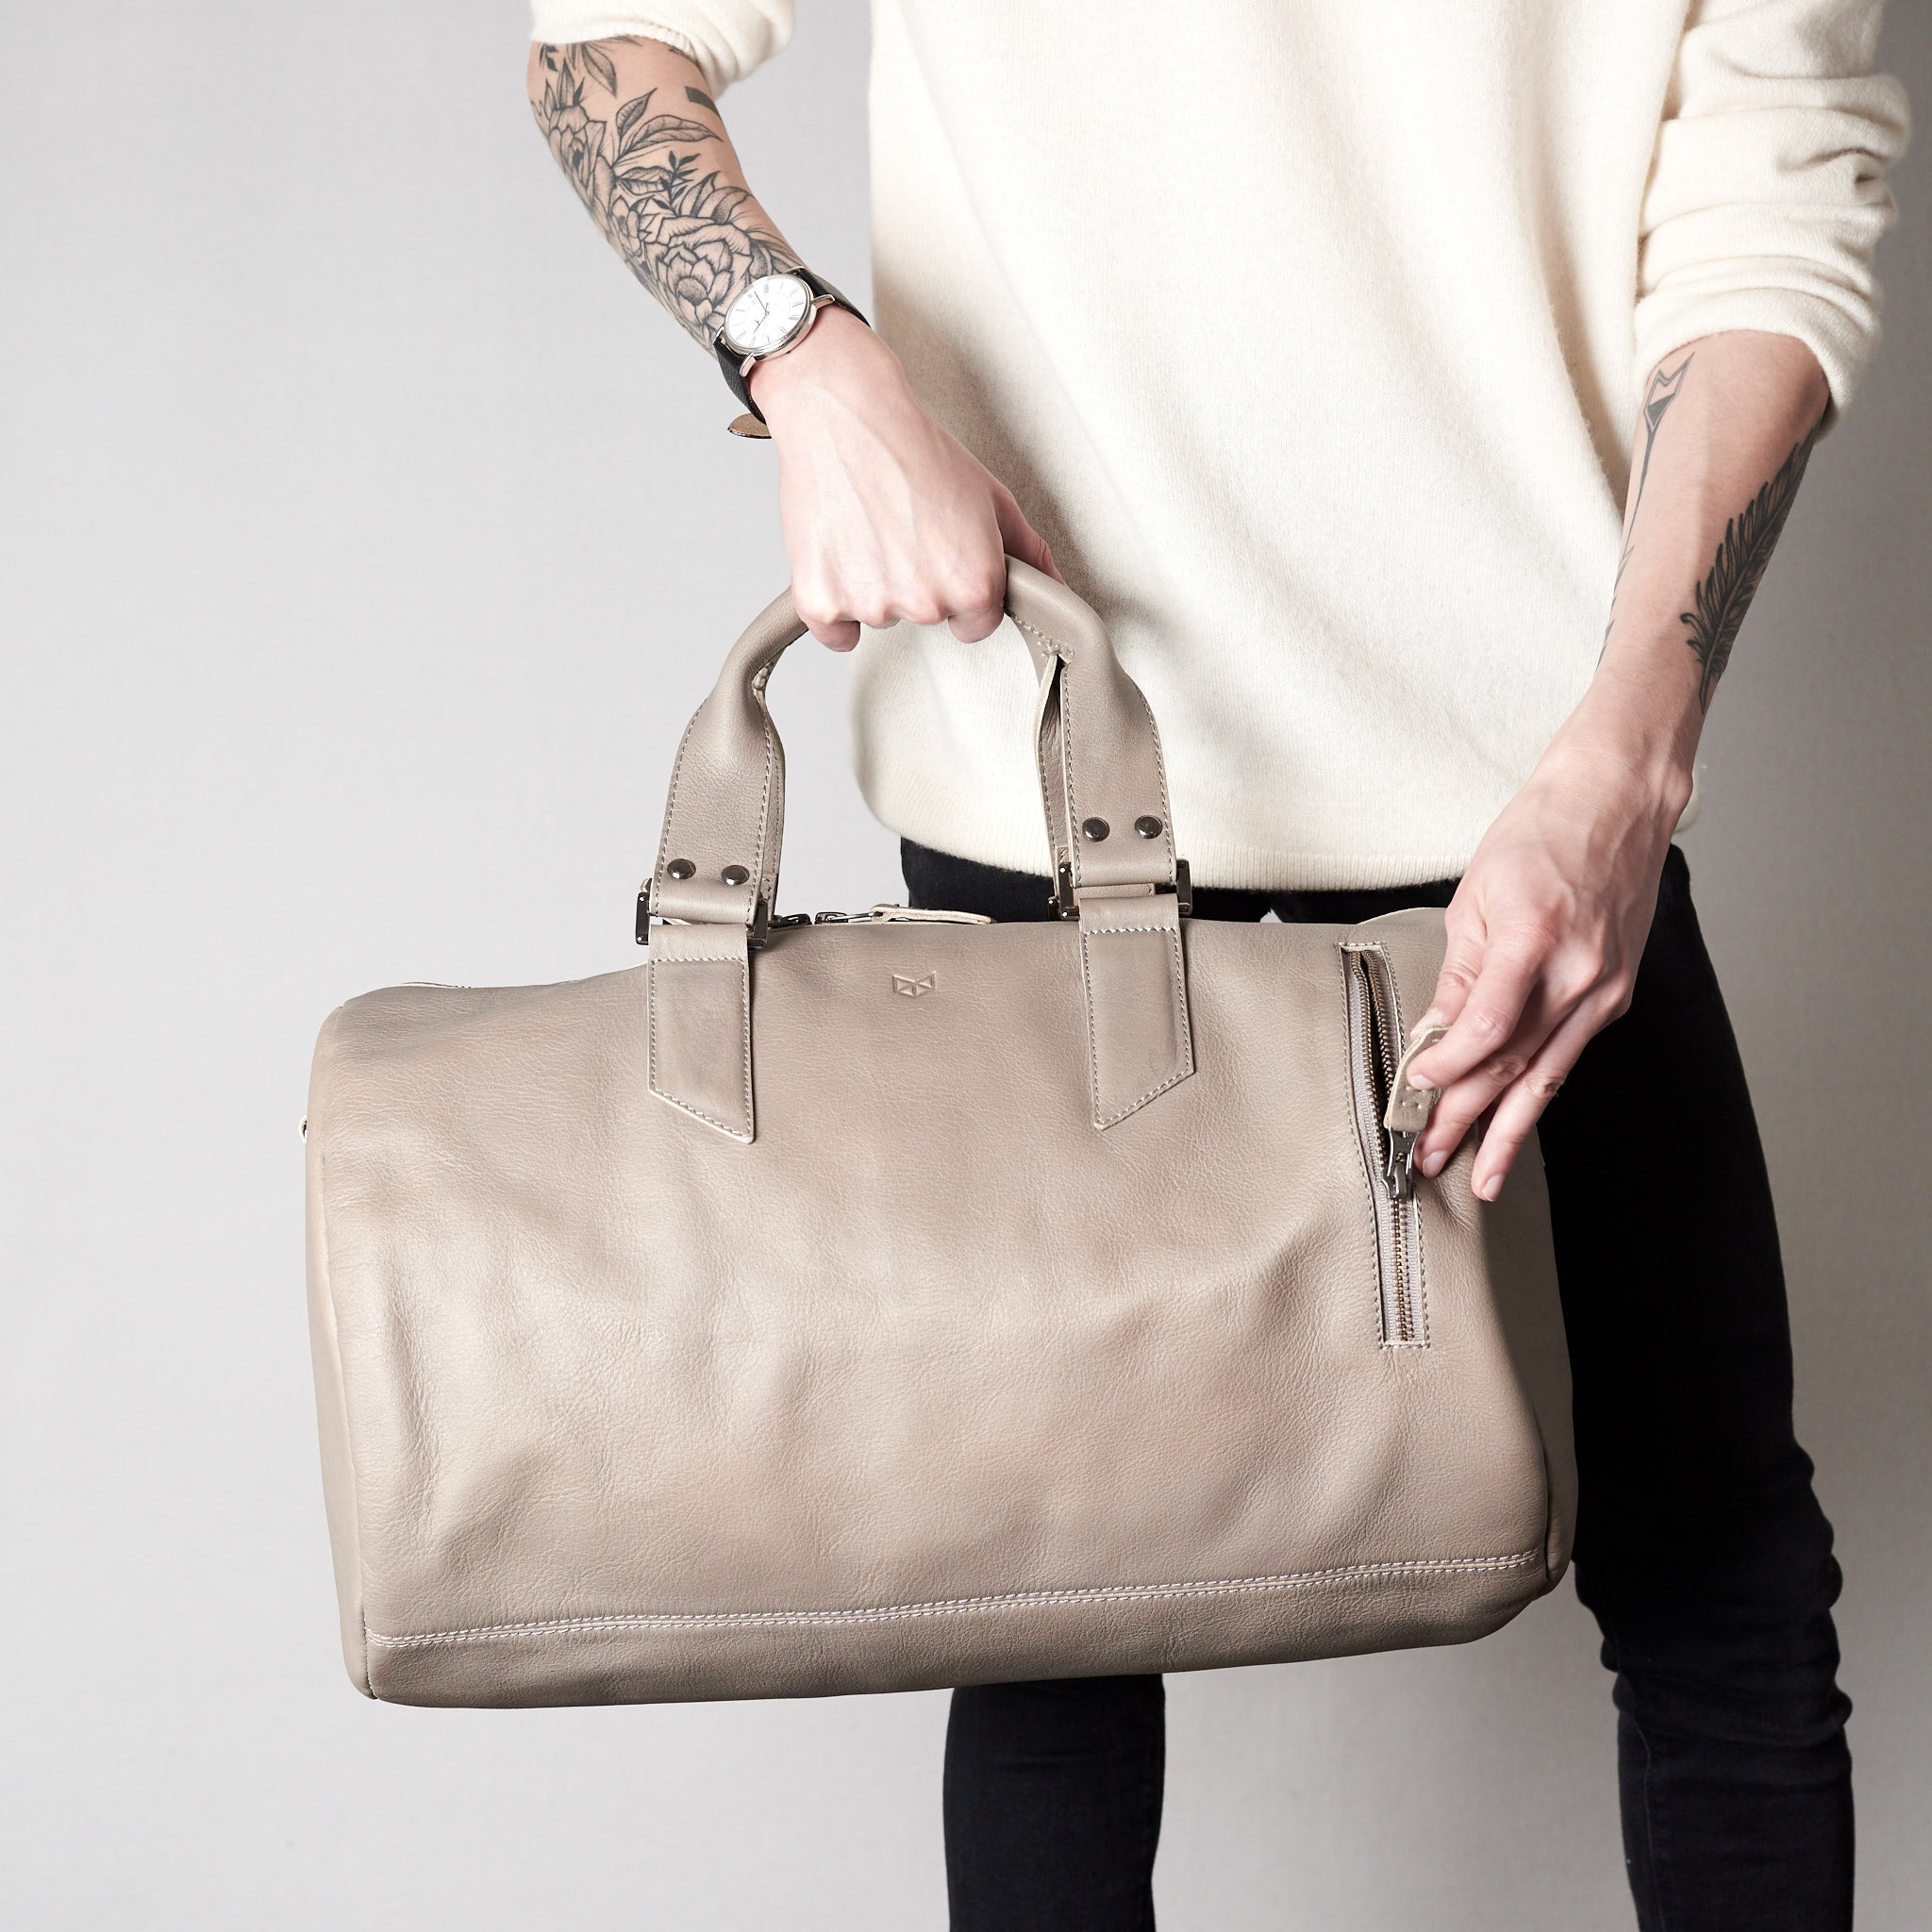 Handmade Substantial Leather Duffle Bag · Grey by Capra - Capra Leather